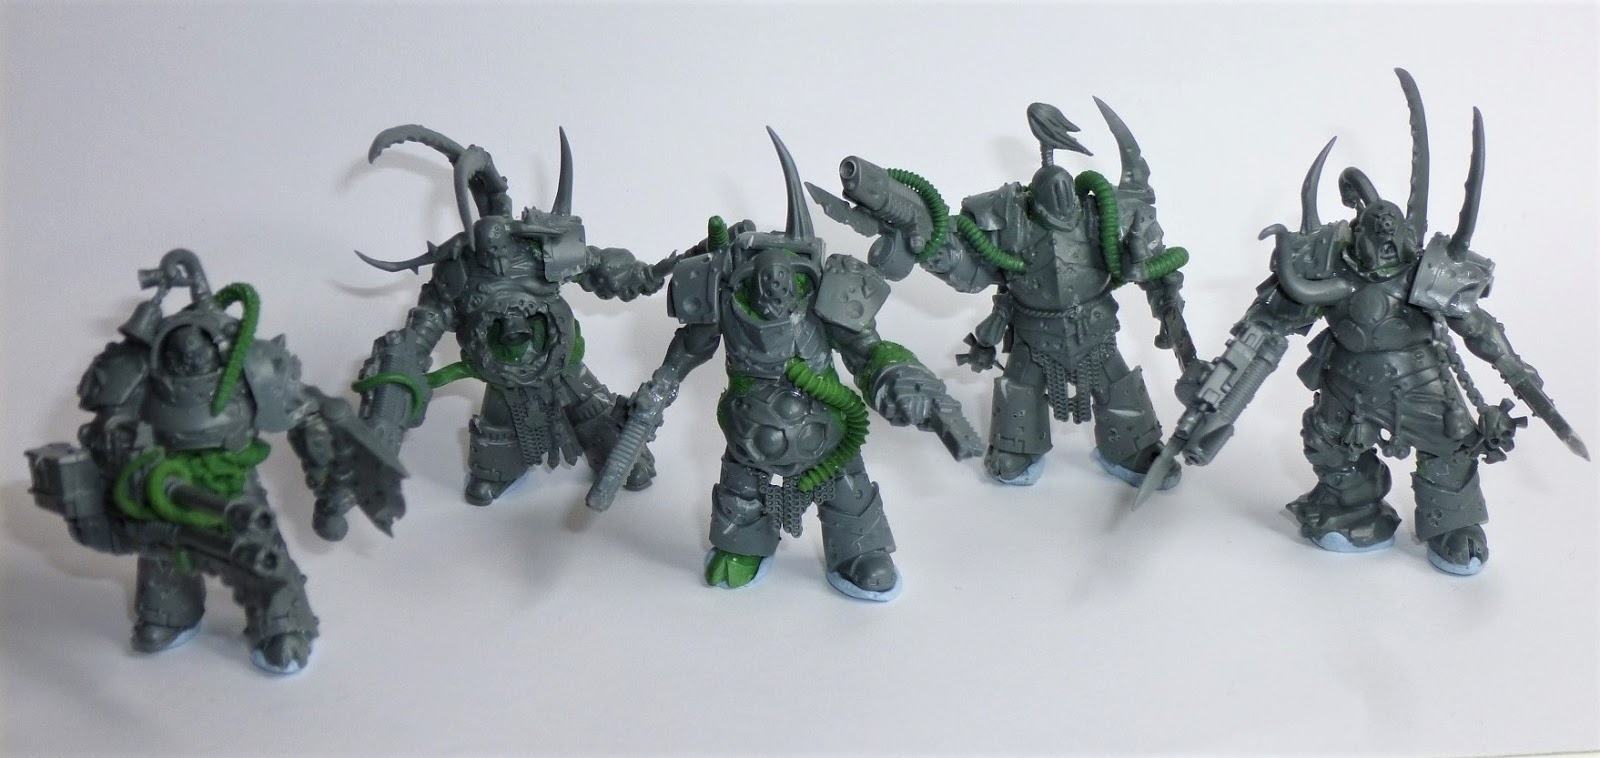 your-death-guard-conversions-death-guard-the-bolter-and-chainsword